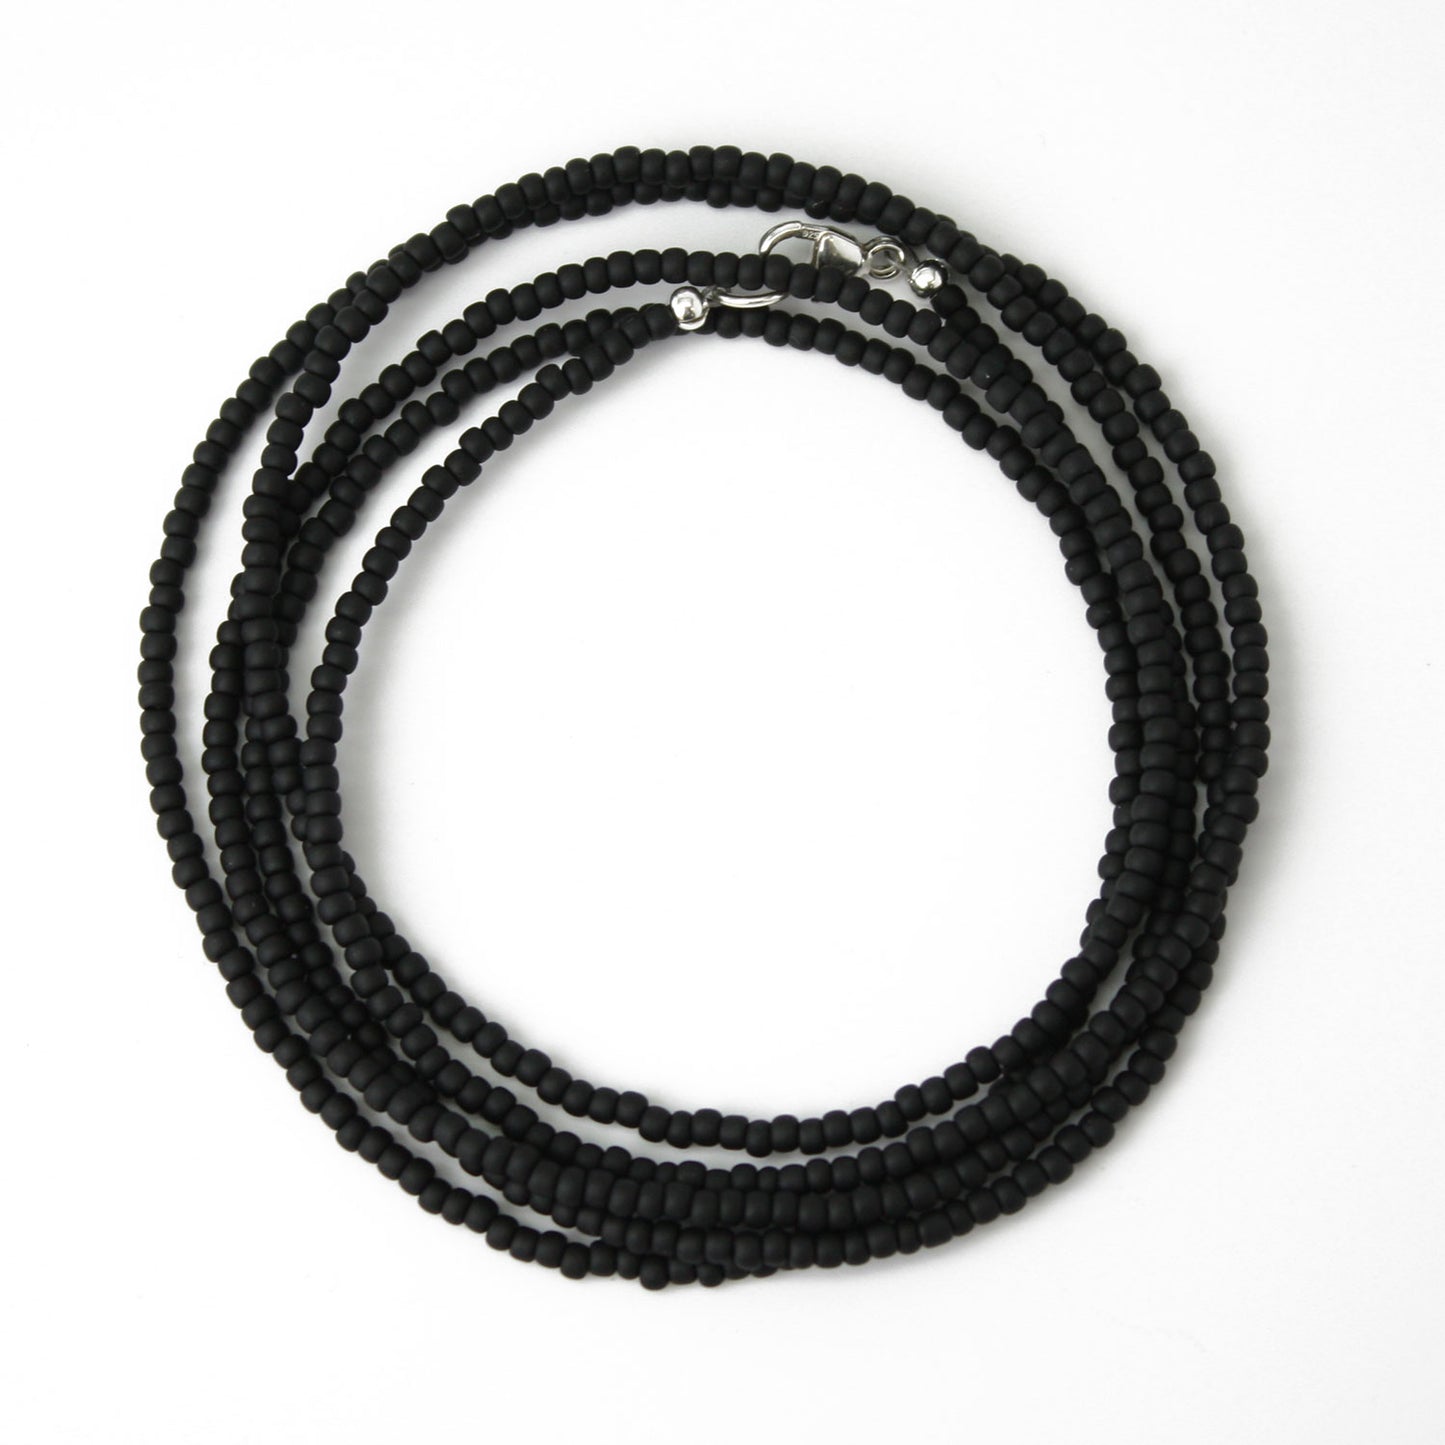 Matte Black Seed Bead Necklace, Thin 1.5mm Single Strand 60